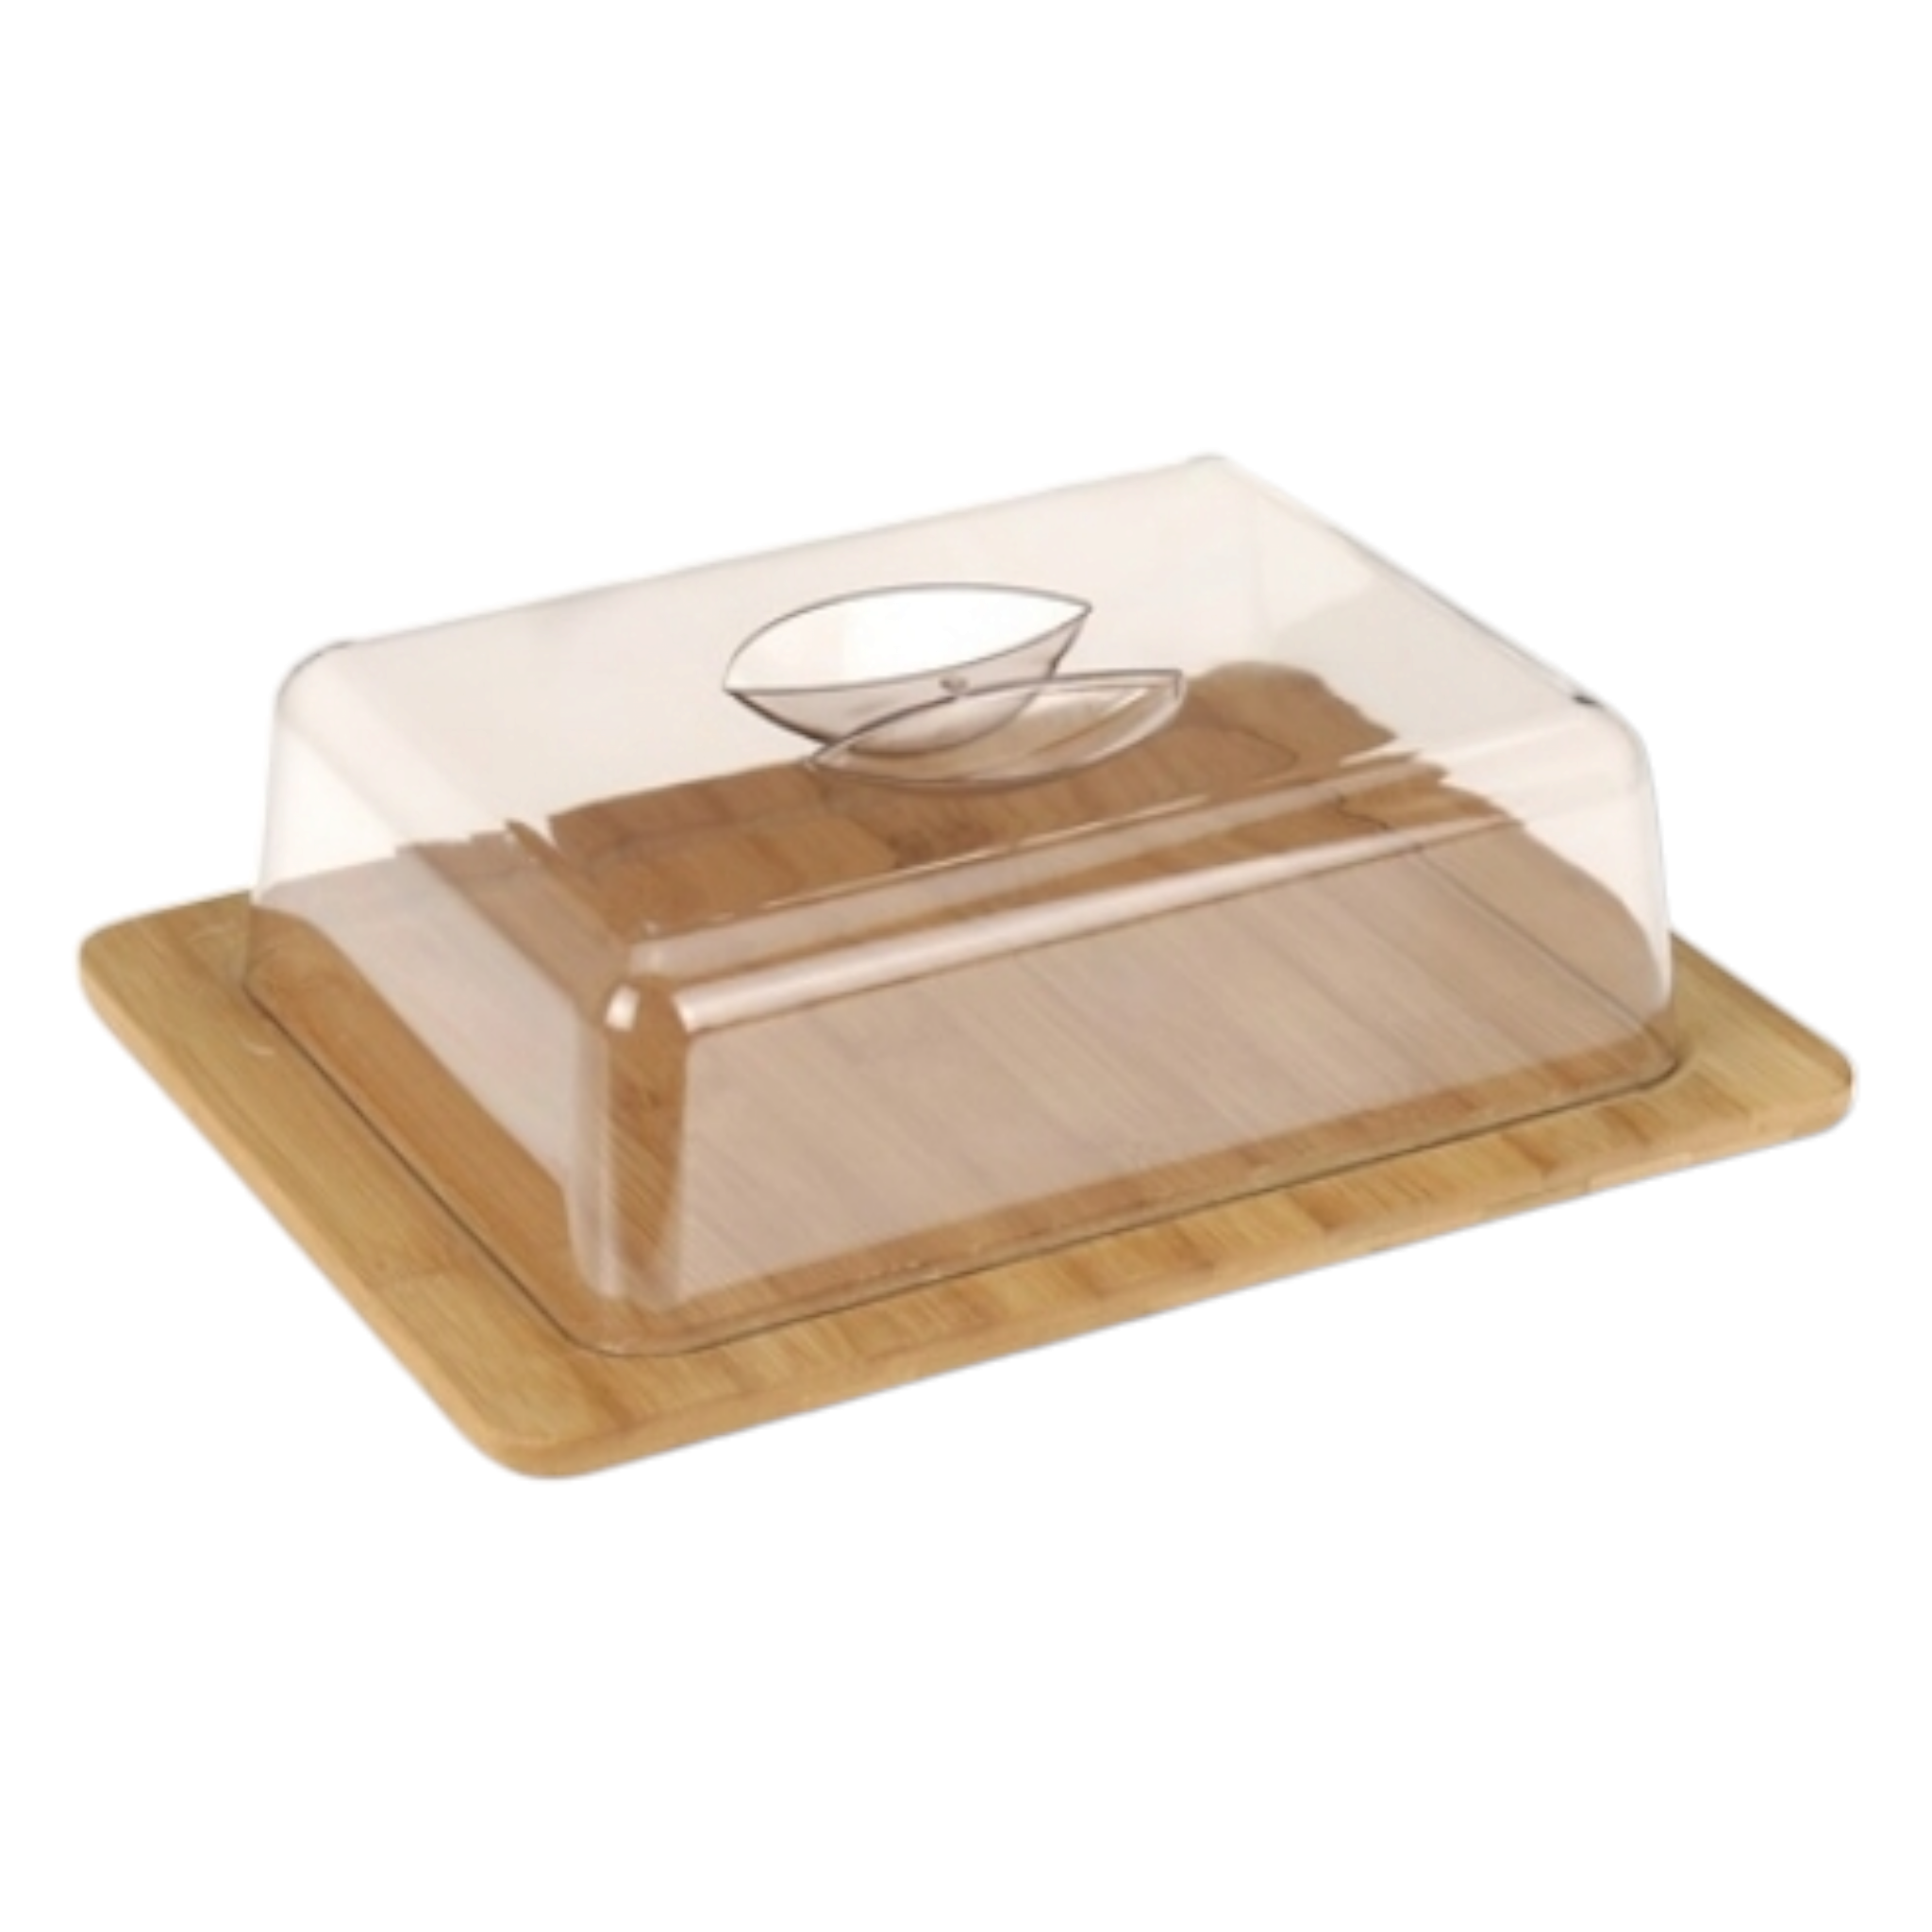 Excellent Houseware Bamboo Cheese Board with Acrylic Dome 25x19.5x7cm